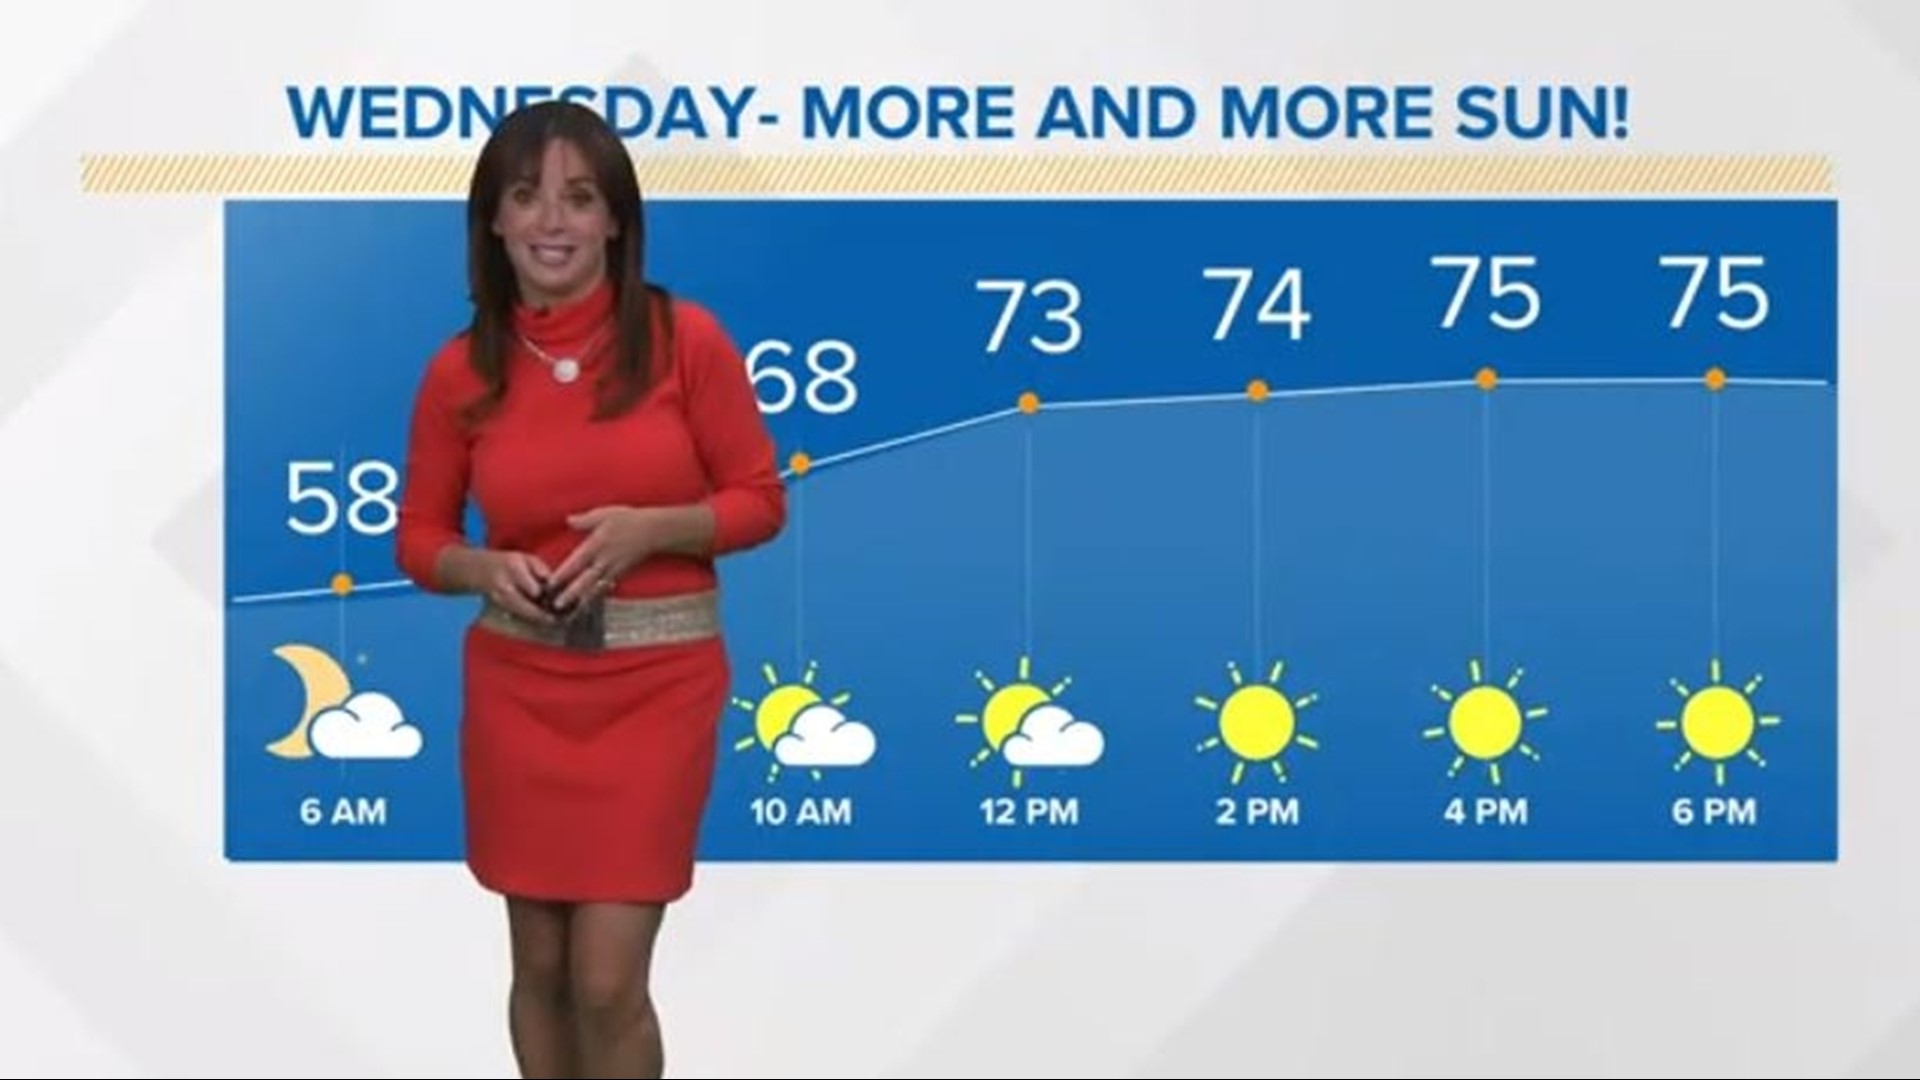 We have several days of sunshine on the way. Hollie Strano has the hour-by-hour details in her morning weather forecast for Wednesday, September 14, 2022.